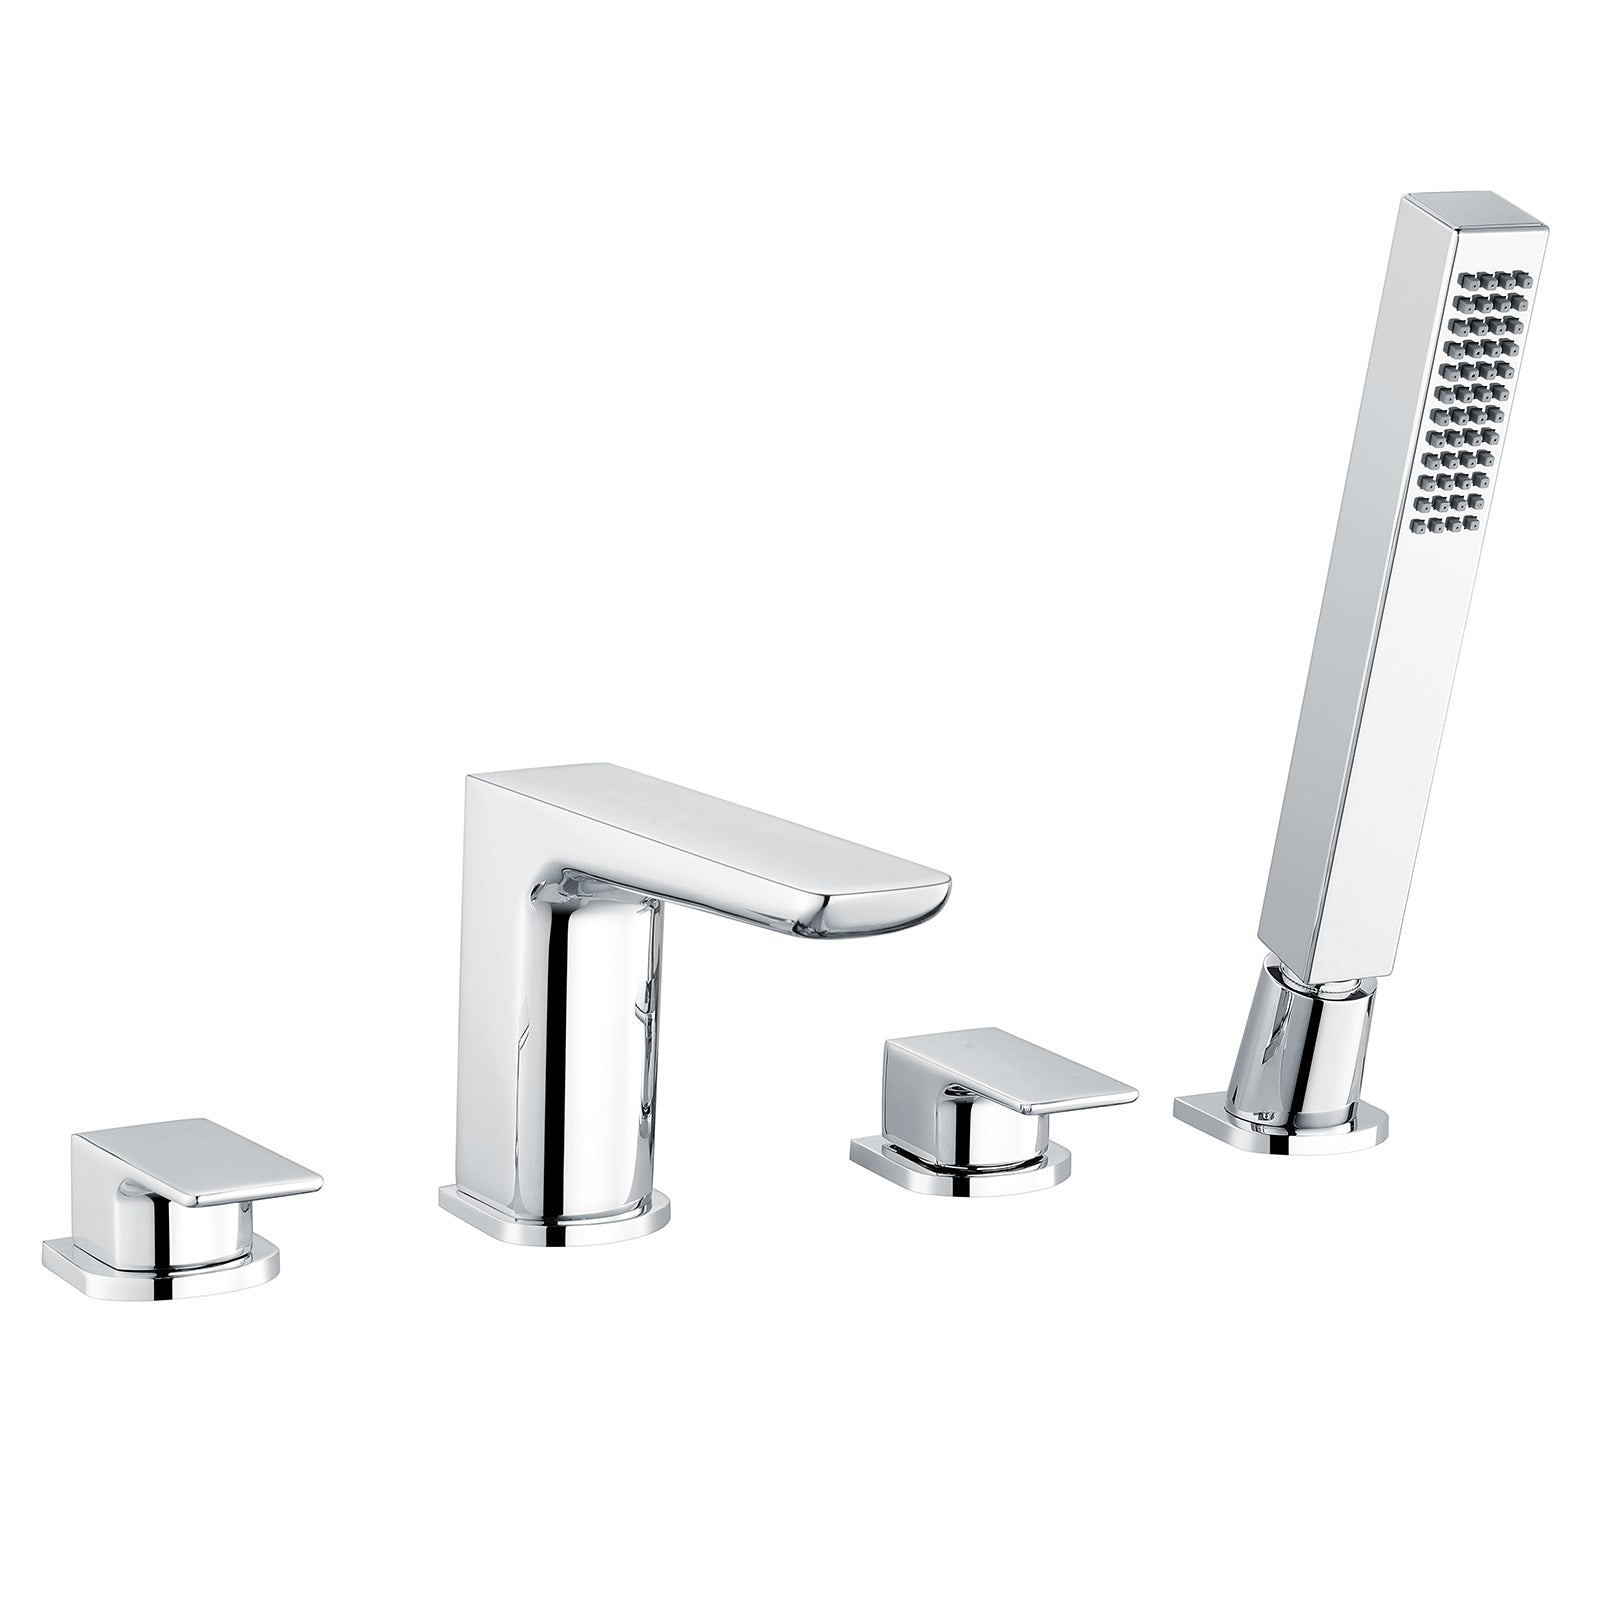 Astra Chrome Bath Filler Hot/Cold Taps With Shower Handset 4 Tap Hole Mixer